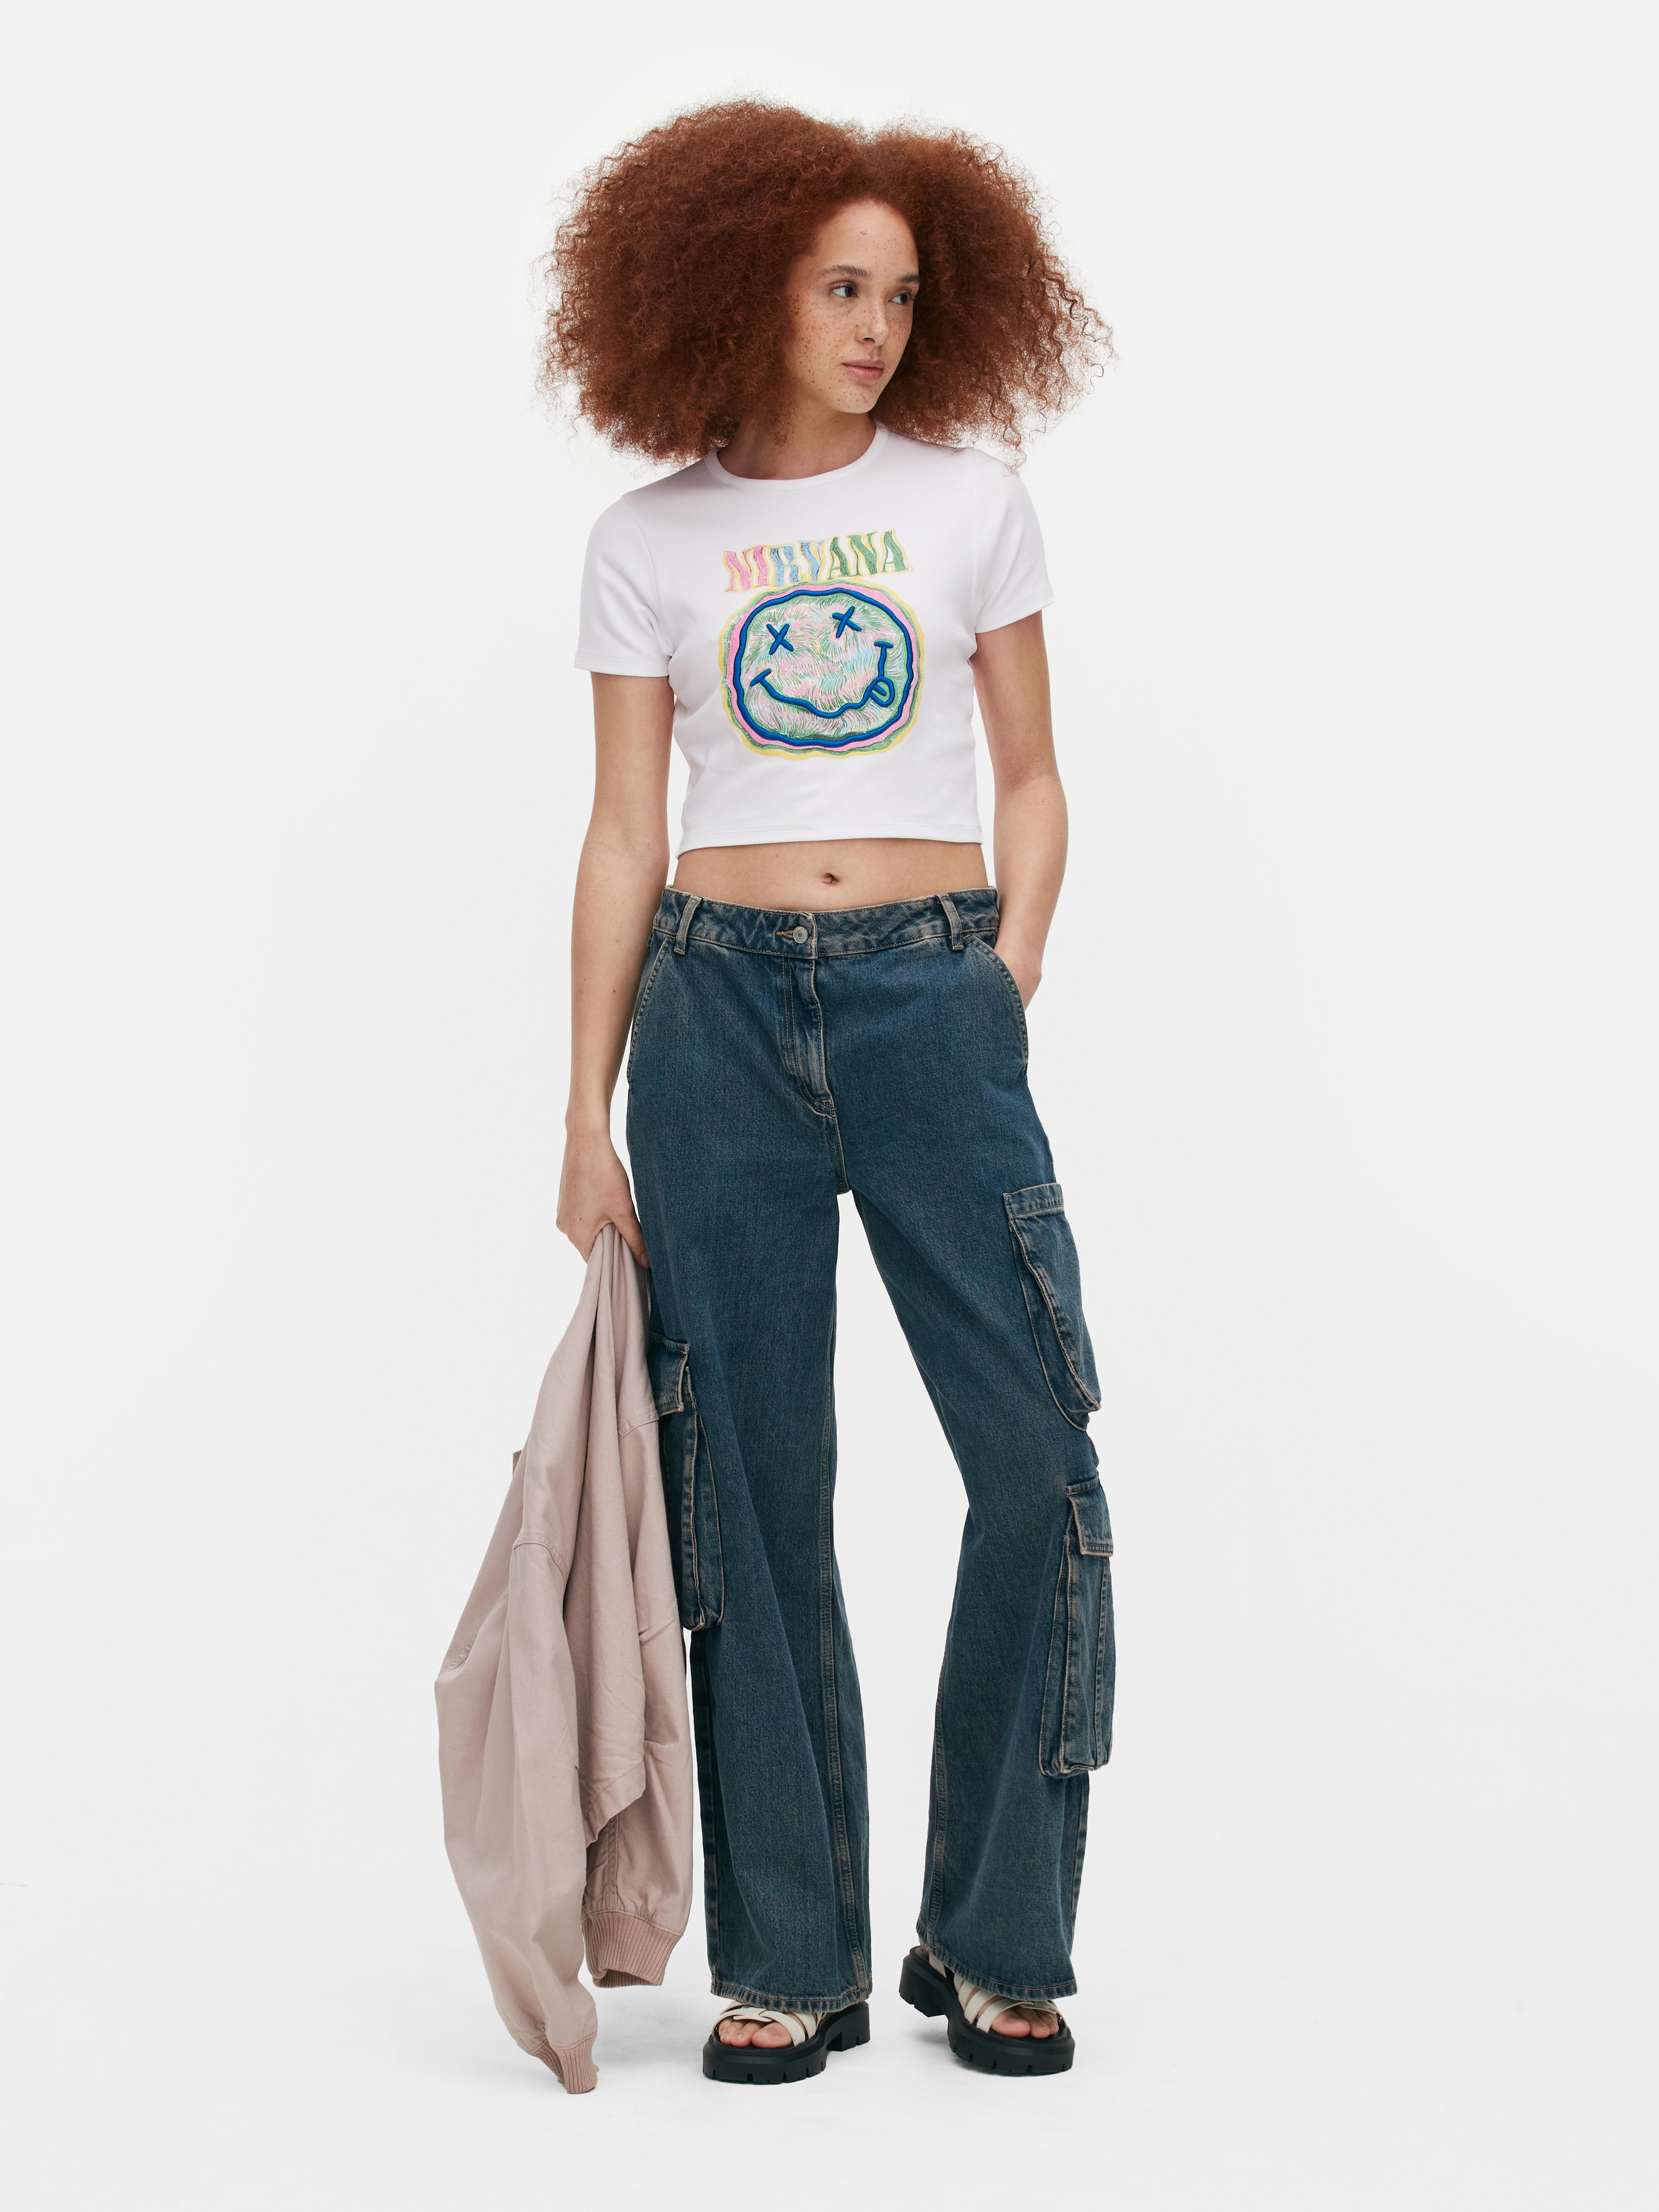 Nirvana Graphic Cropped Baby T-Shirt